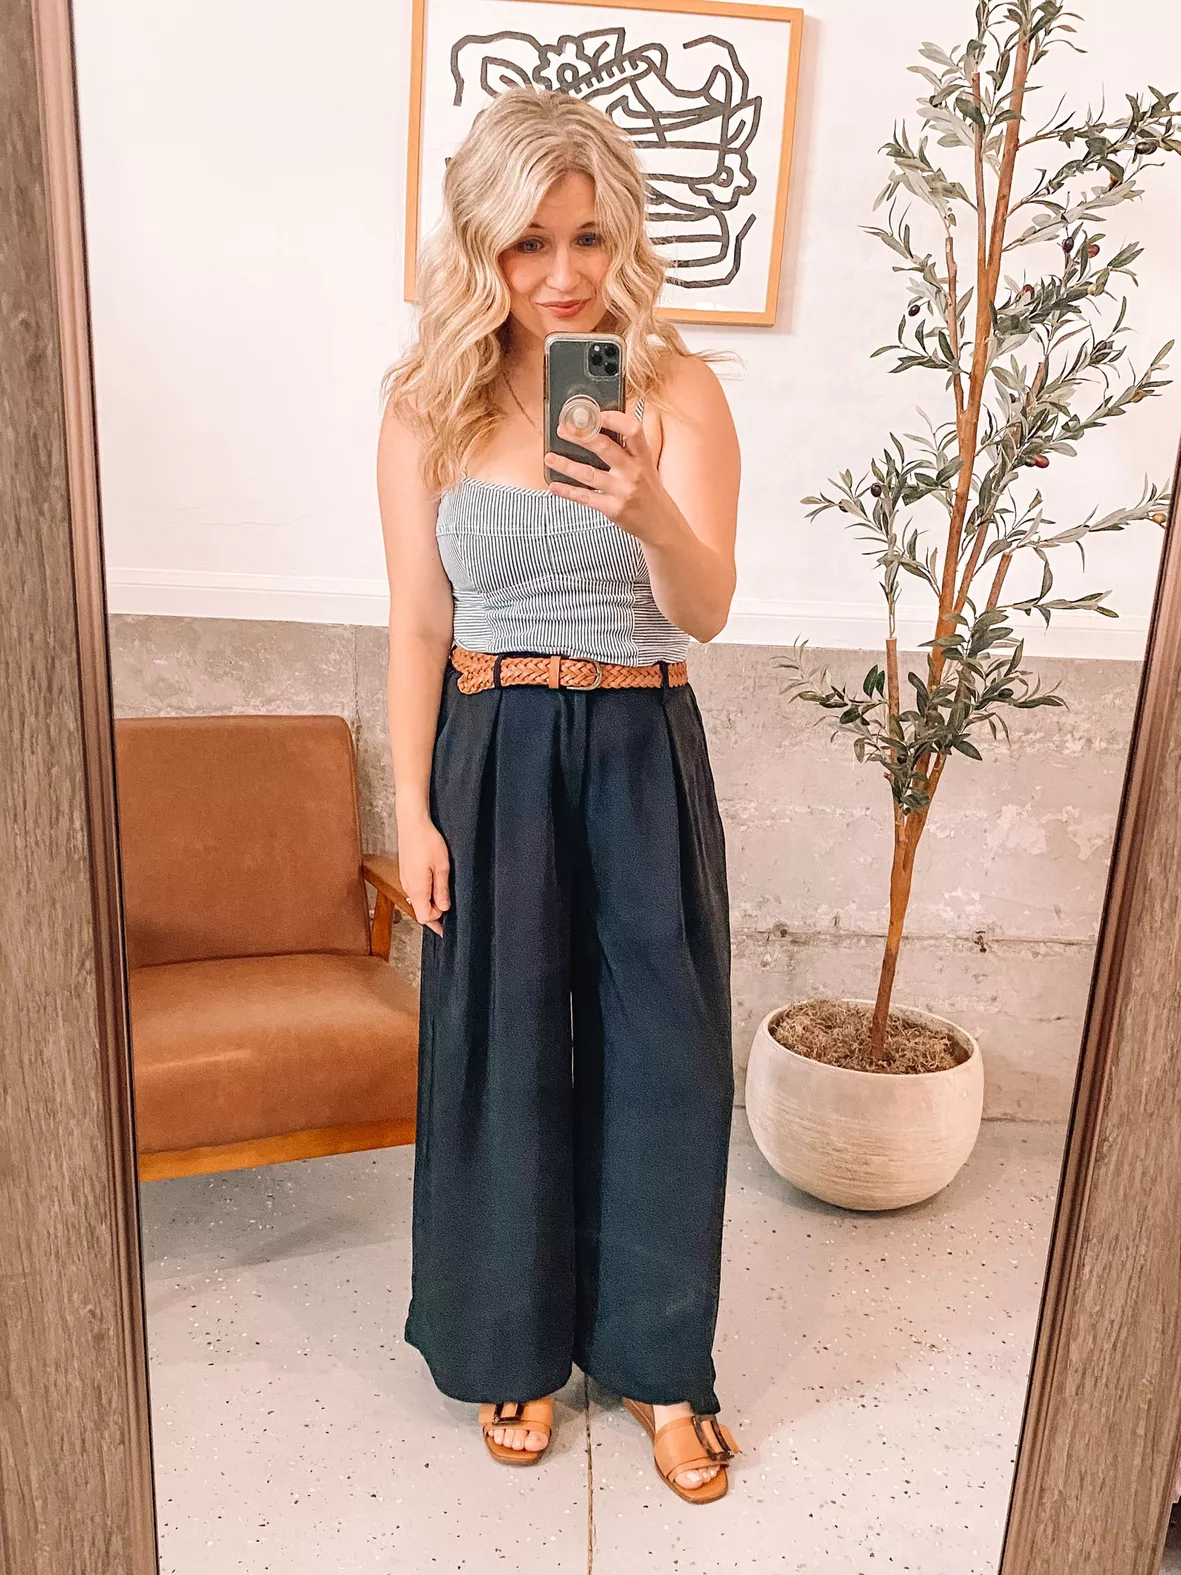 Outfit of the Day: HIGH WAIST PANTS + CROPPED TOP